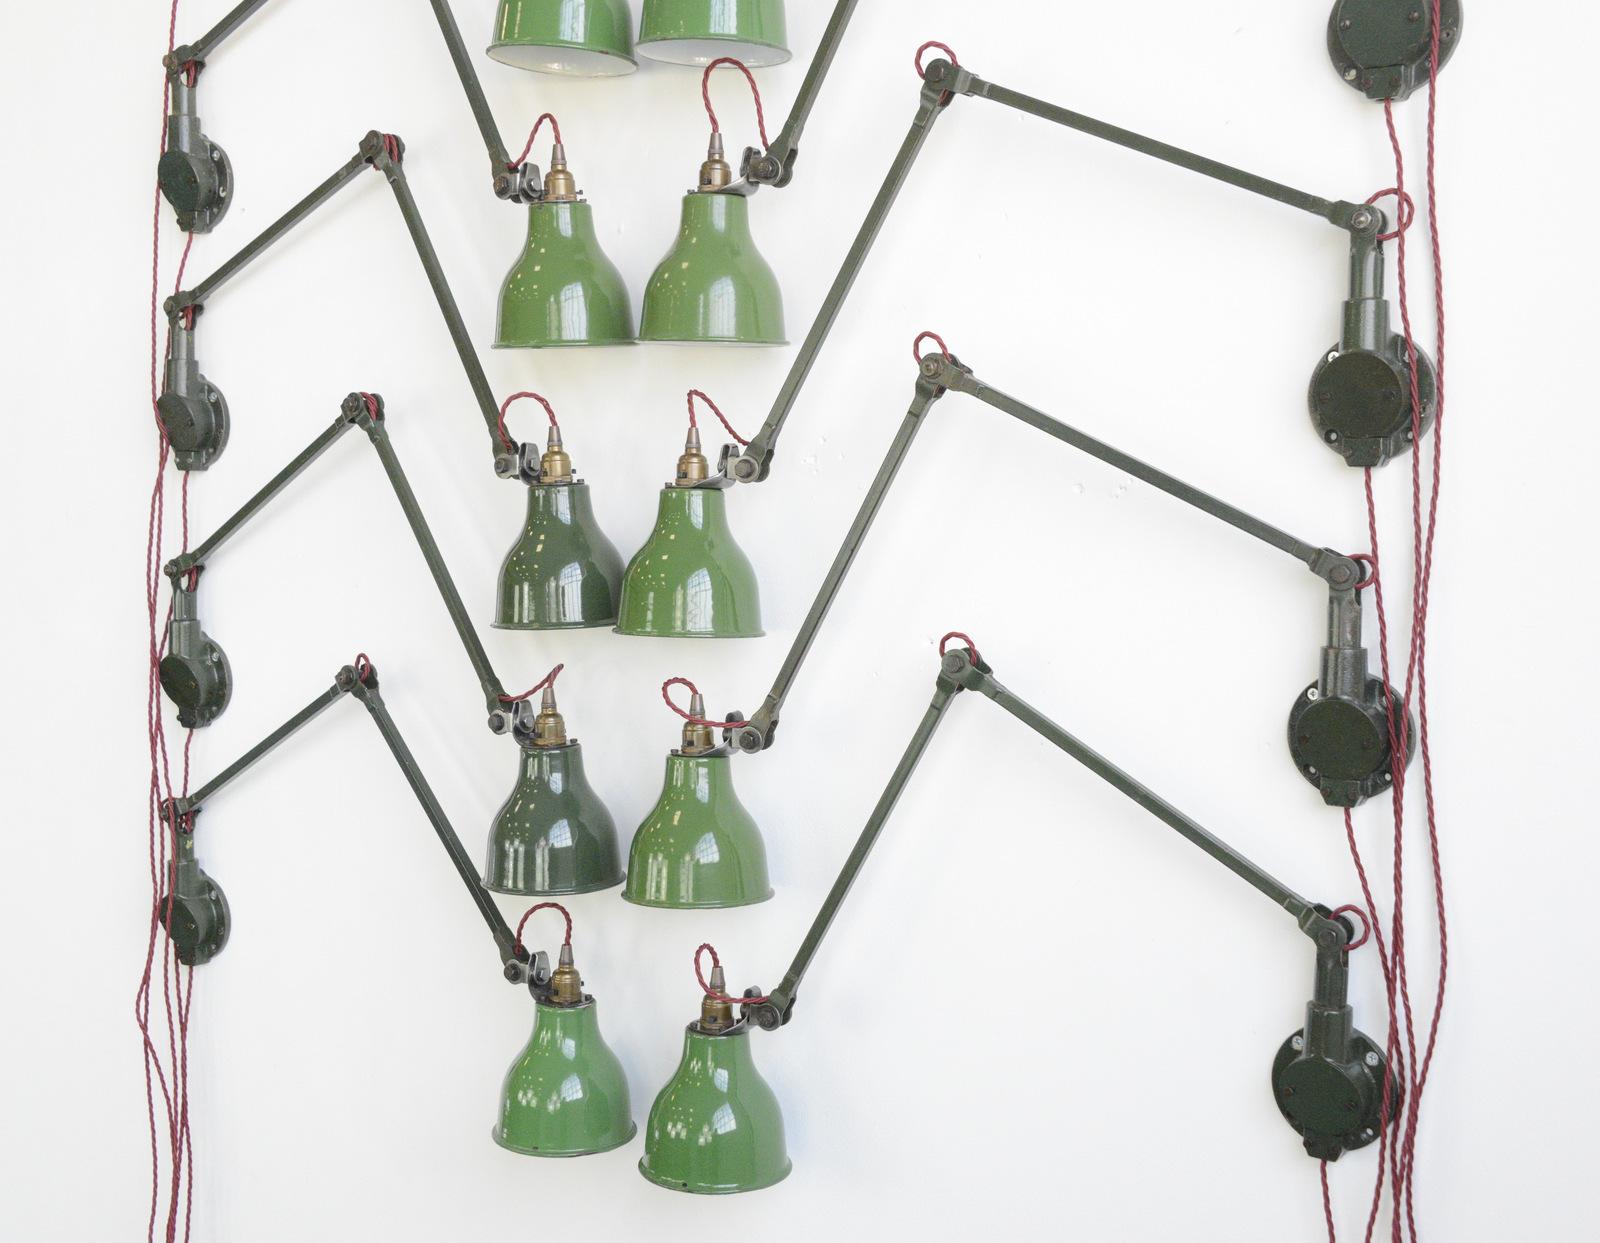 Industrial wall lamps by Mek Elek, circa 1930s

- Price is per lamp (10 available)
- Vitreous green enamel shades
- Articulated steel arms
- Takes B22 fitting bulbs
- On/Off toggle switch on the bulb holder
- Produced my Mek Elek, London
-